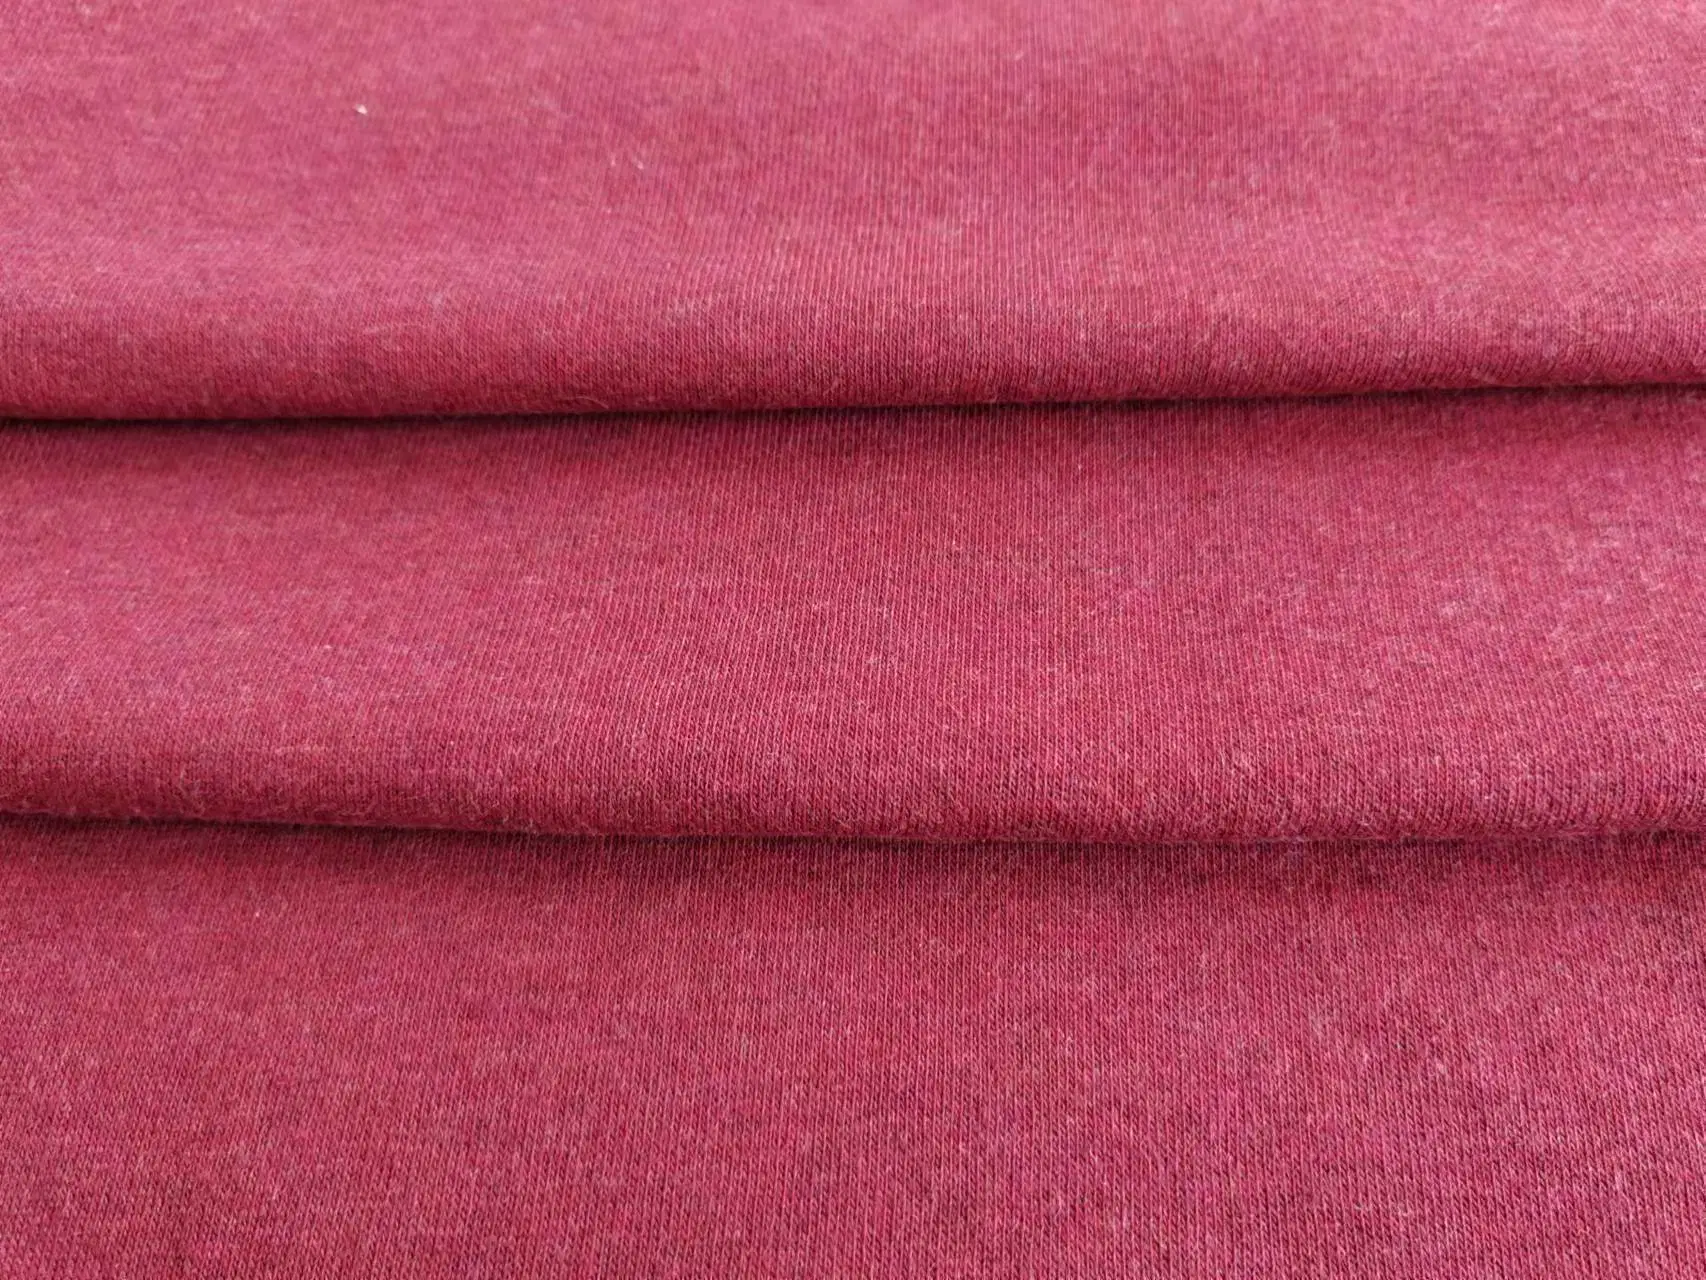 Organic Cotton/Polyester Melange Fleece French Terry Backing Brushed Wholesale High Quality Knitted Fabric for Garment Bedding Toy